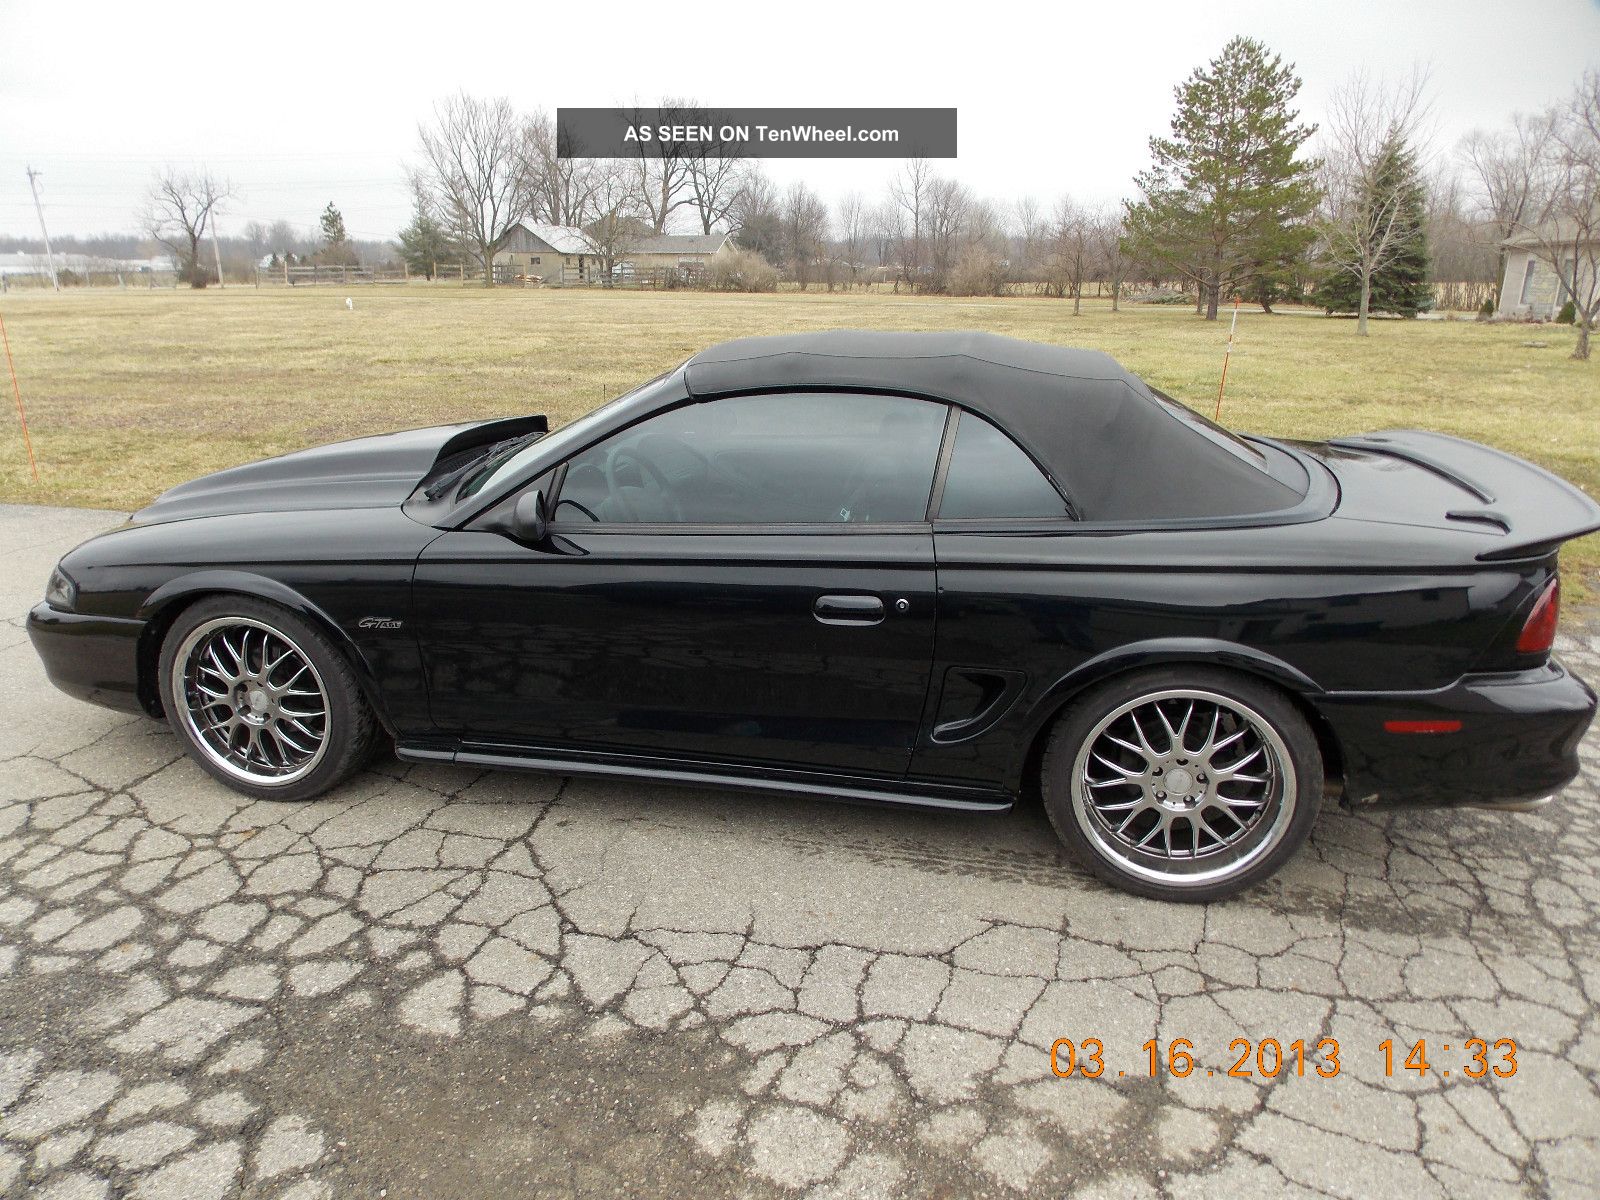 1997 Ford mustang gt 4.6 specs #2